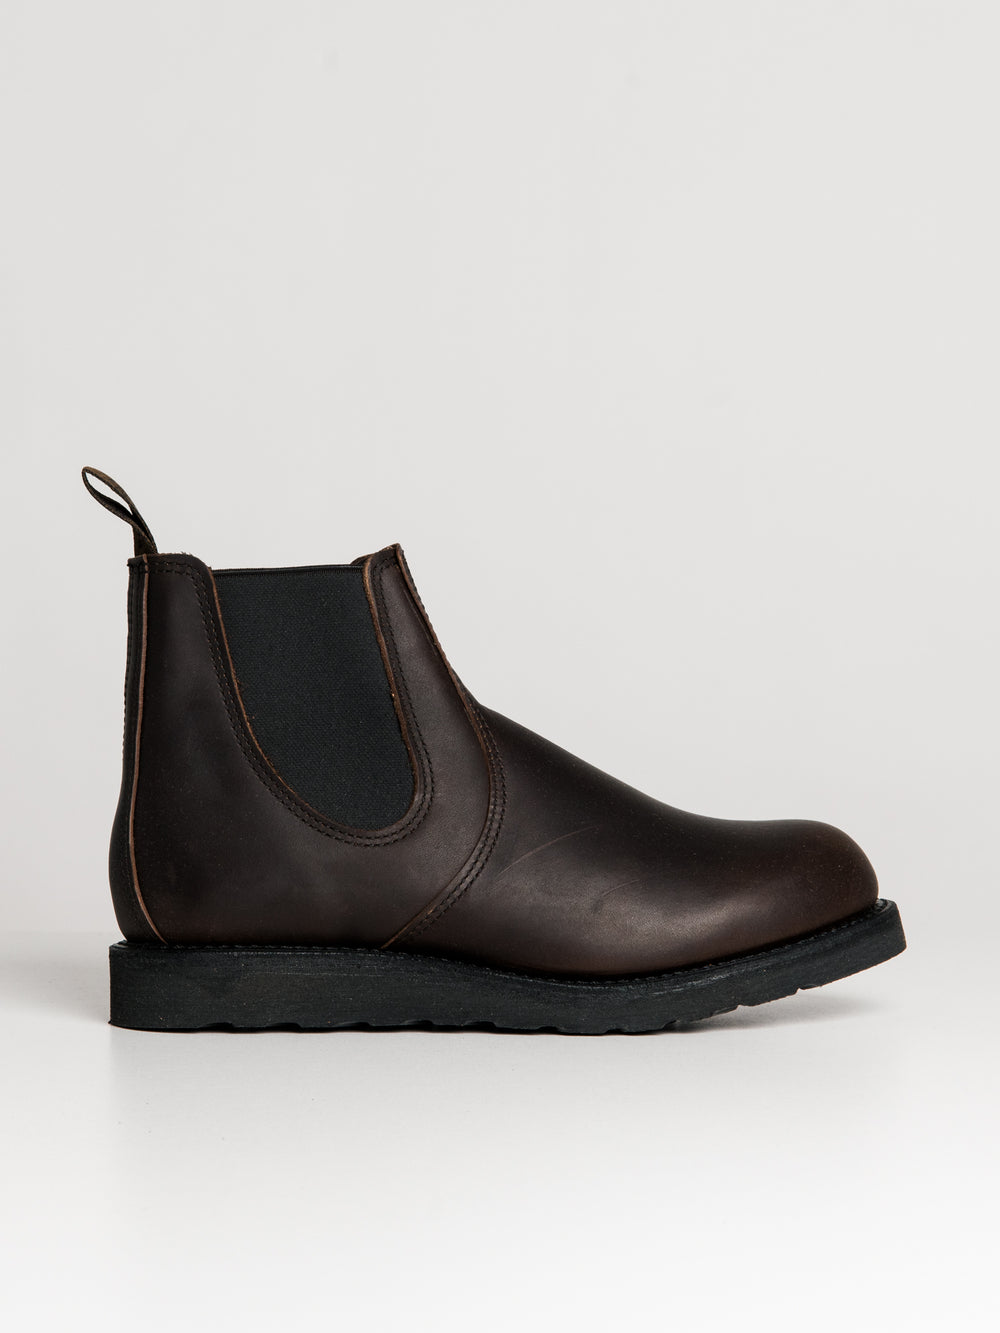 MENS RED WING SHOES CLASSIC CHELSEA BOOT - CLEARANCE